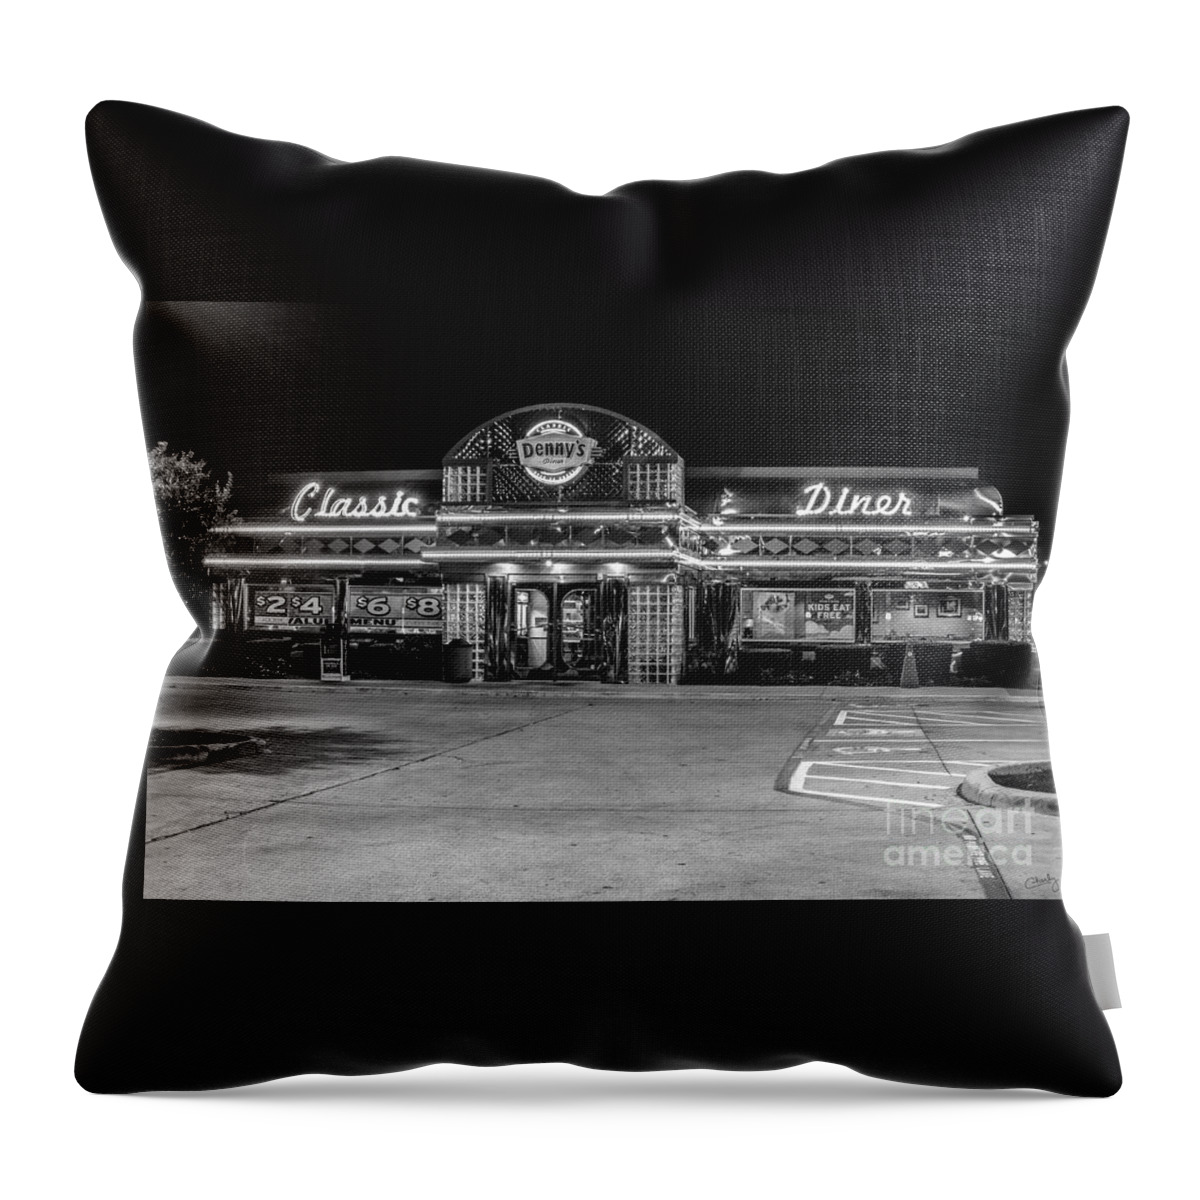 Denny's Diner Throw Pillow featuring the photograph Denny's Classic Diner by Imagery by Charly